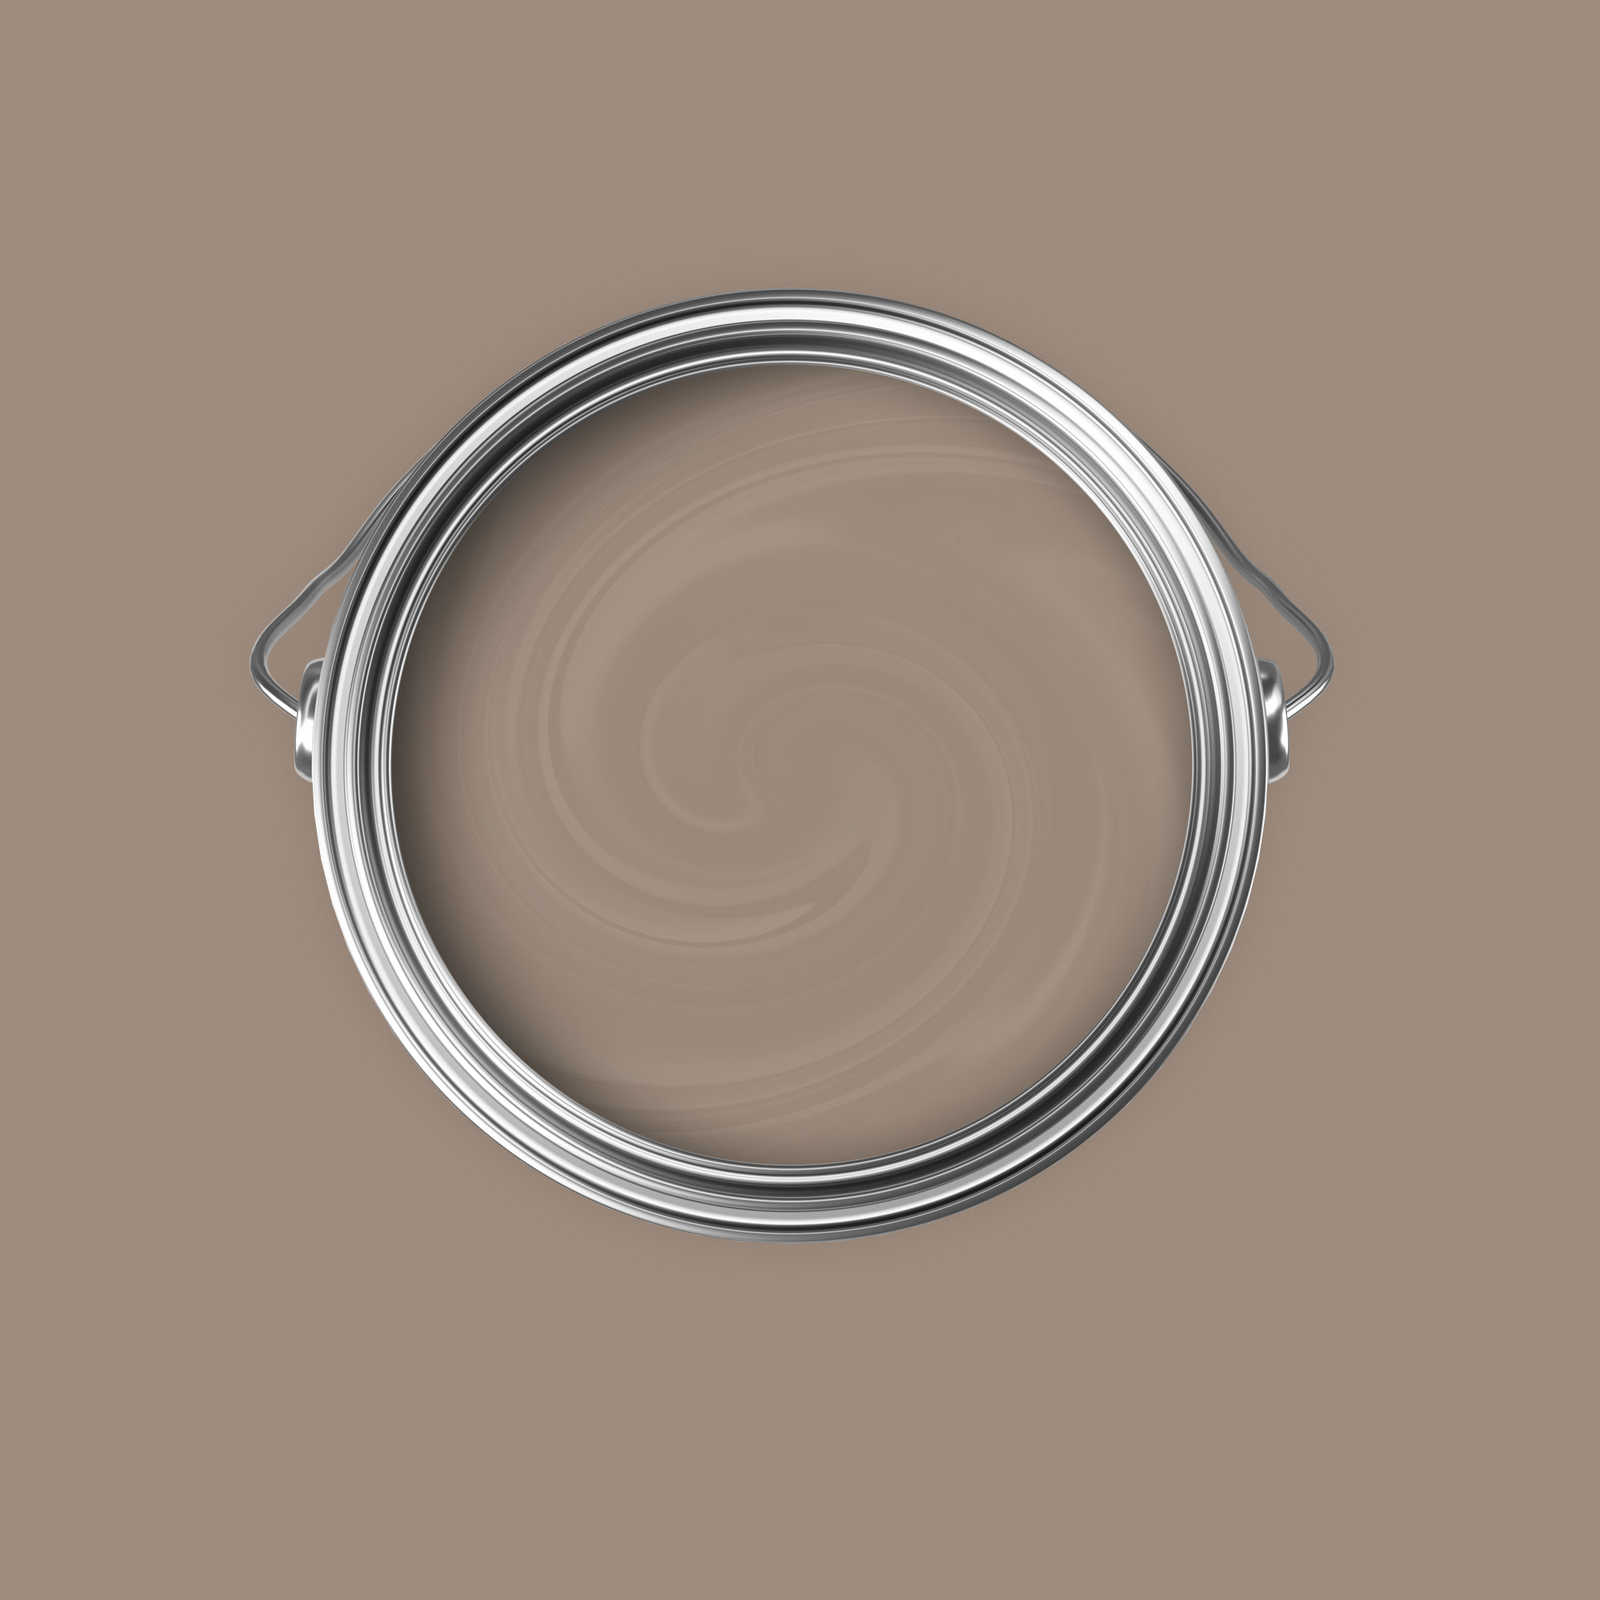             Premium Wall Paint Down-to-earth Taupe »Talented calm taupe« NW702 – 5 litre
        